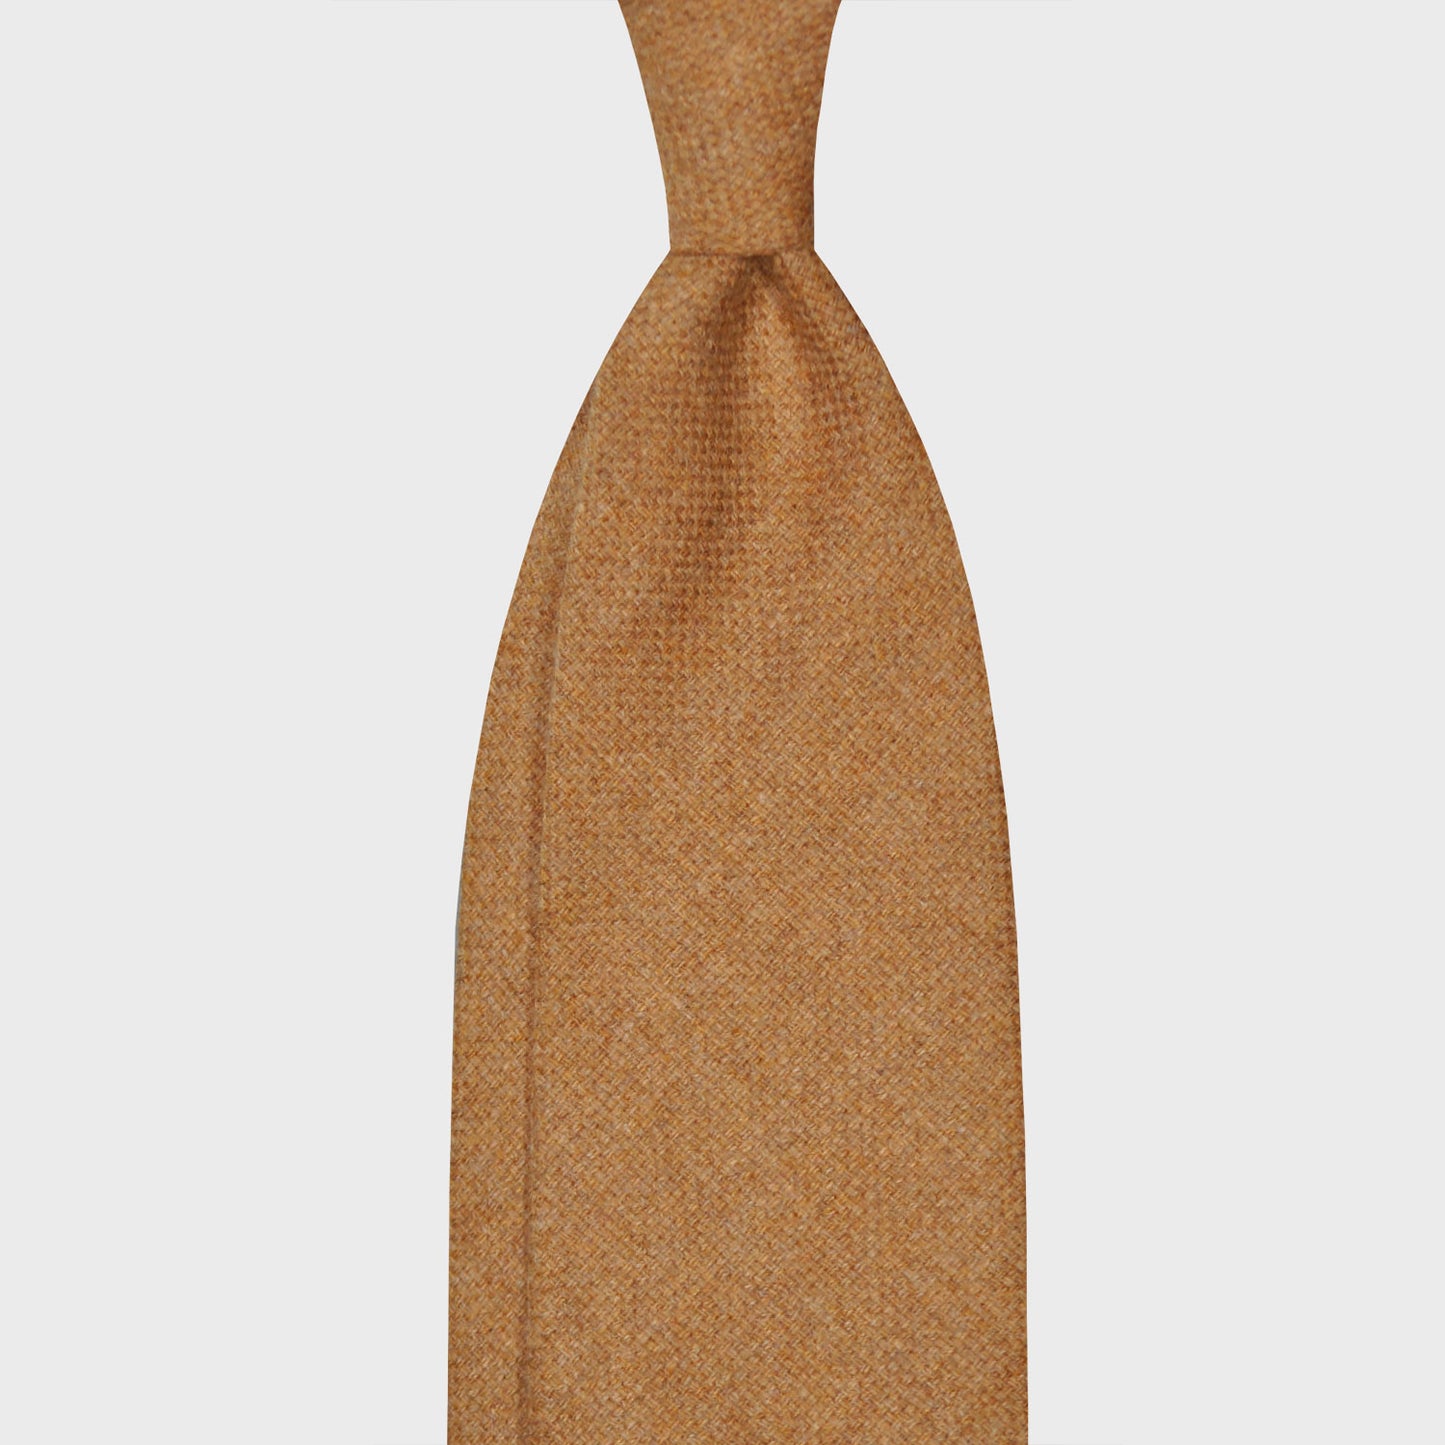 Camel Brown Light Flannel Twill Wool Tie Unlined 3 Folds. Soft and light flannel twill wool tie, handmade F.Marino Napoli for Wools Boutique Uomo, camel brown color, soft fabric to the touch, not bristly, ideal for a regular knot.